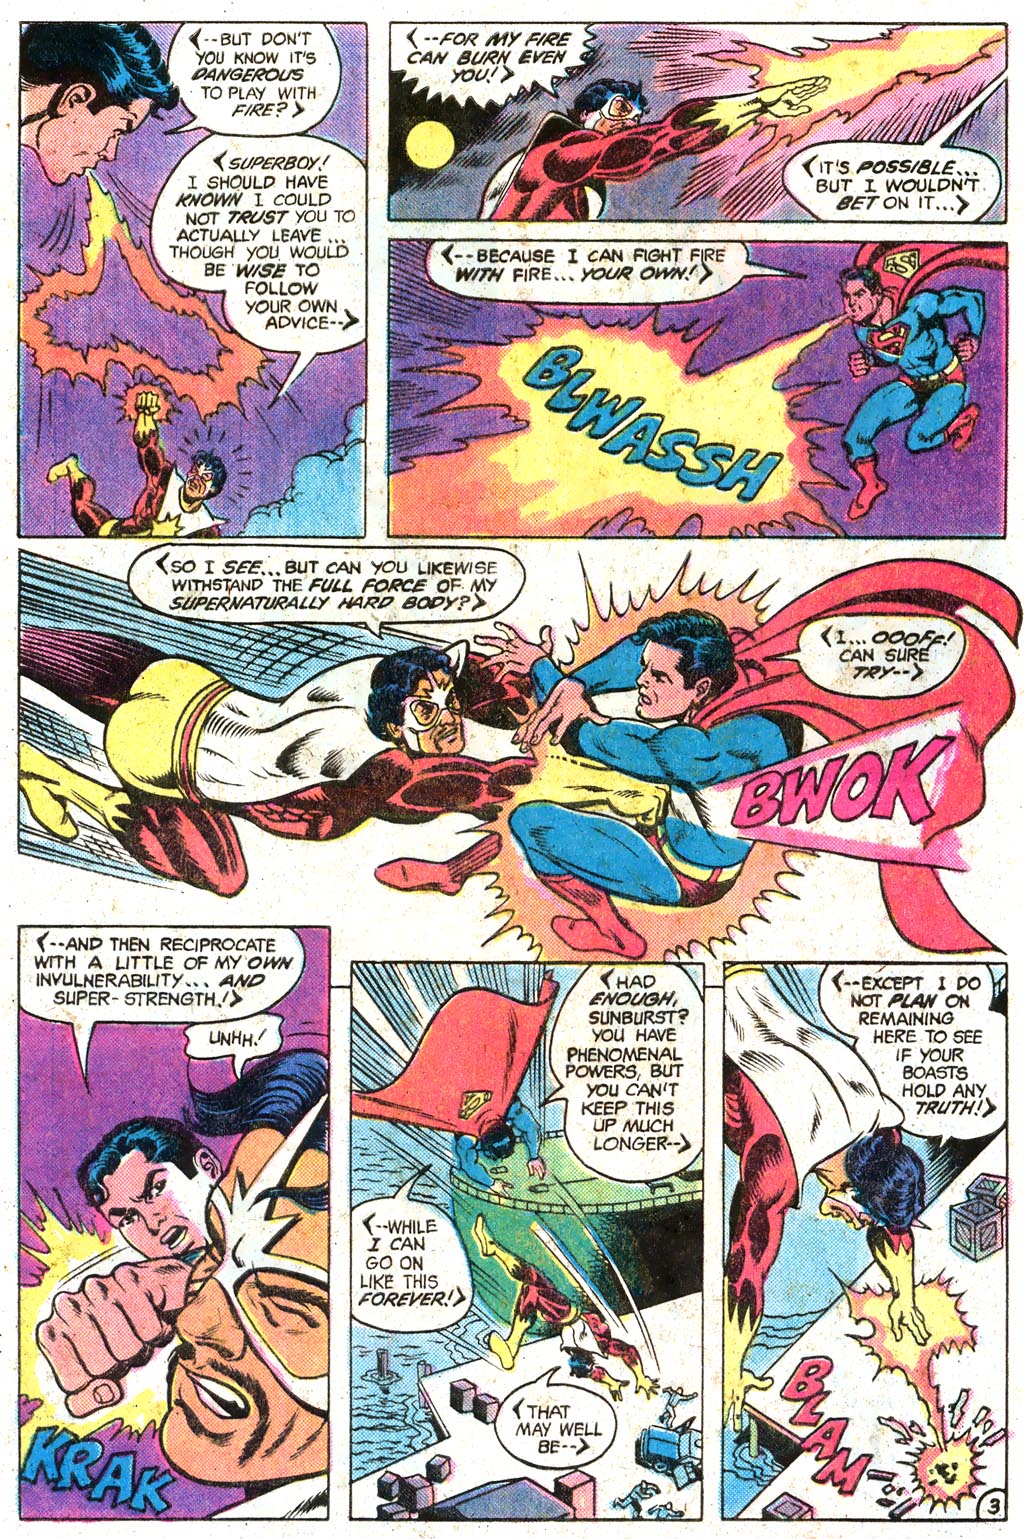 The New Adventures of Superboy 46 Page 4